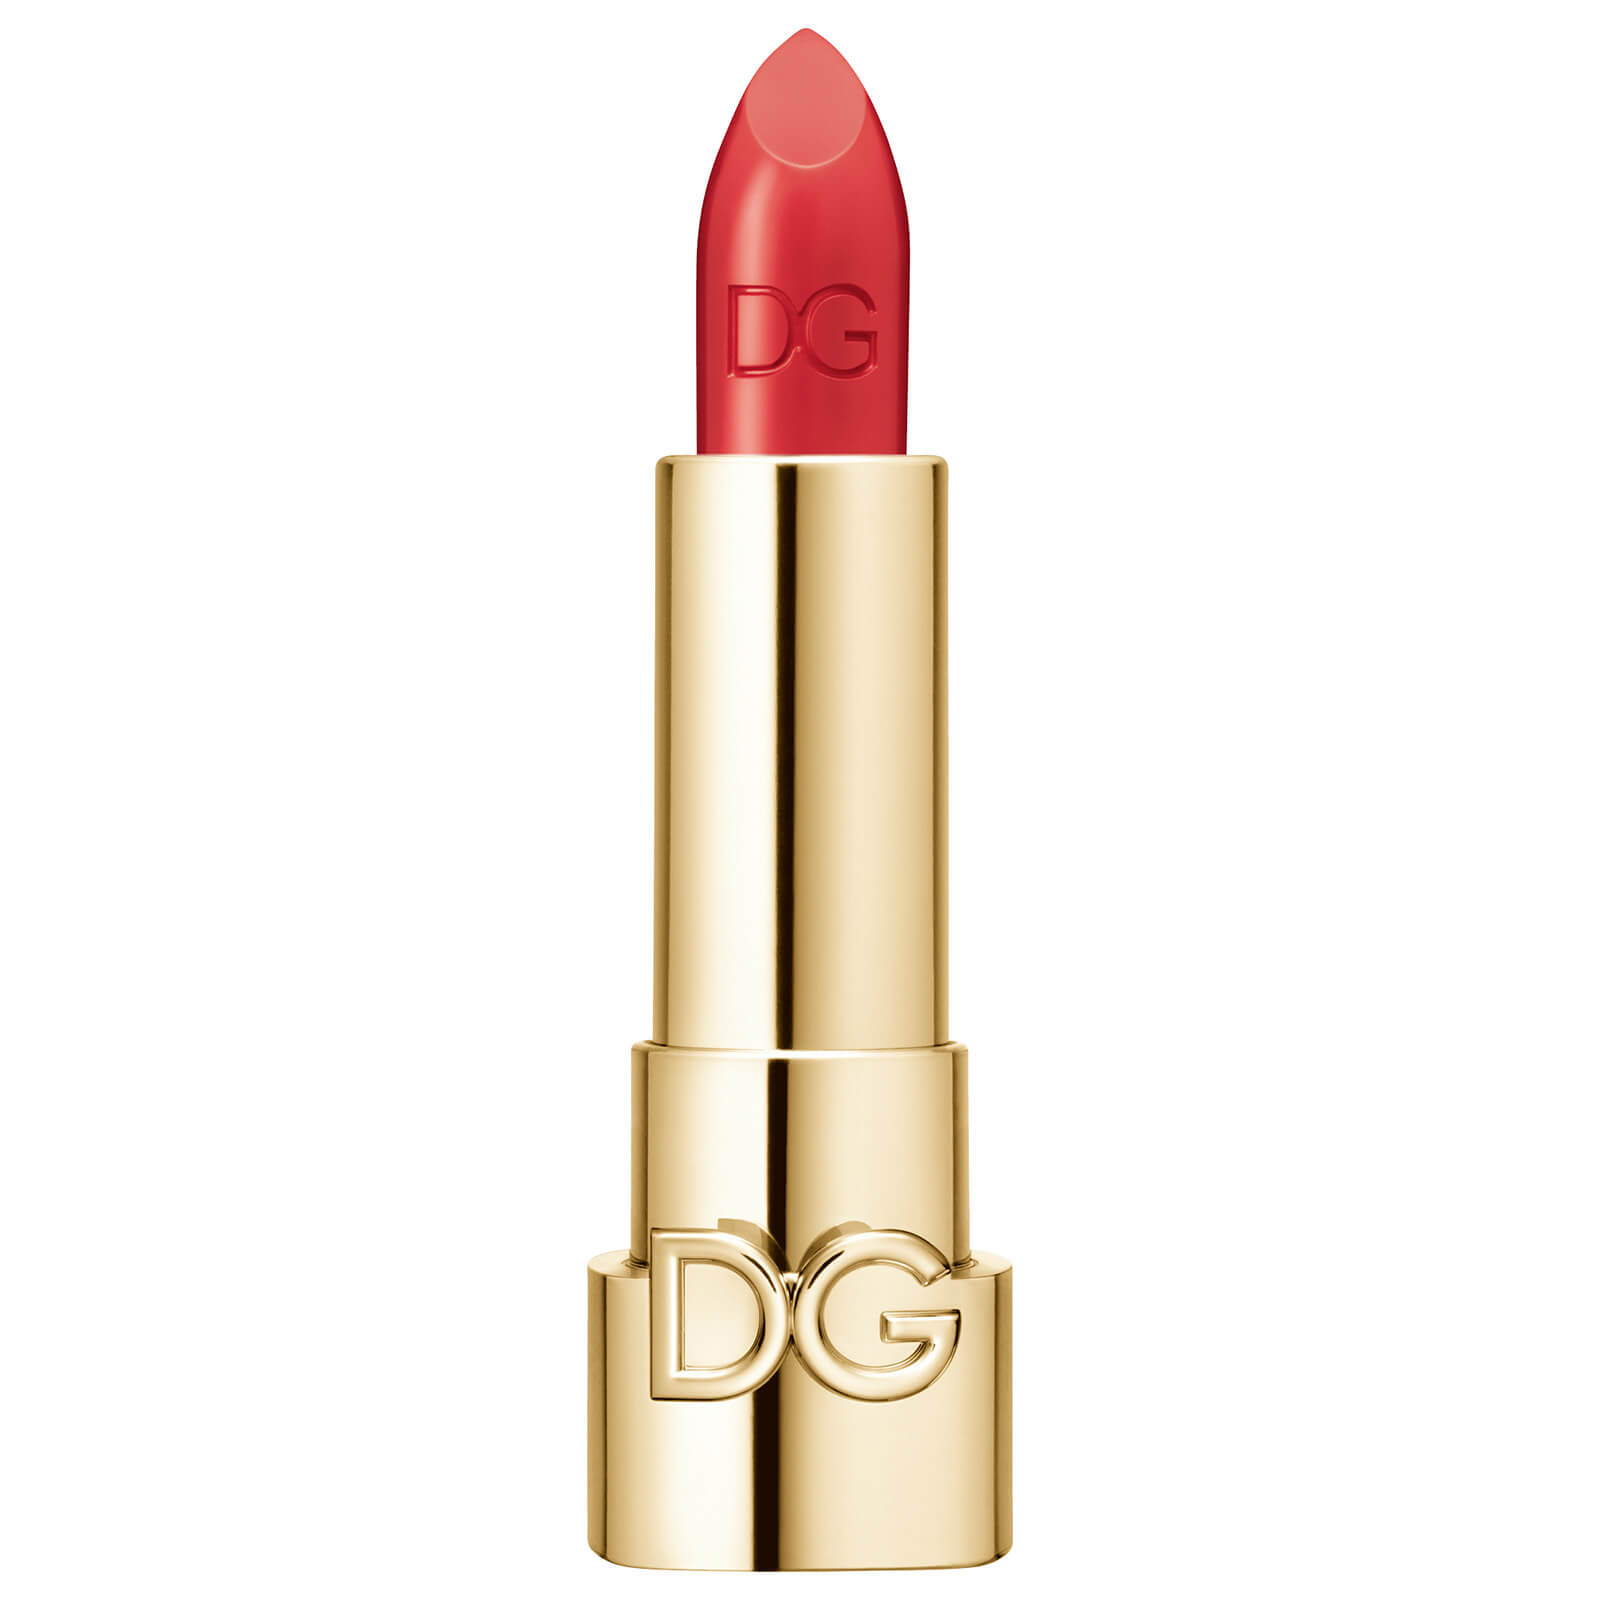 Image of Dolce&Gabbana The Only One Lipstick 1.7g (No Cap) (Various Shades) - 610 Passionate Red